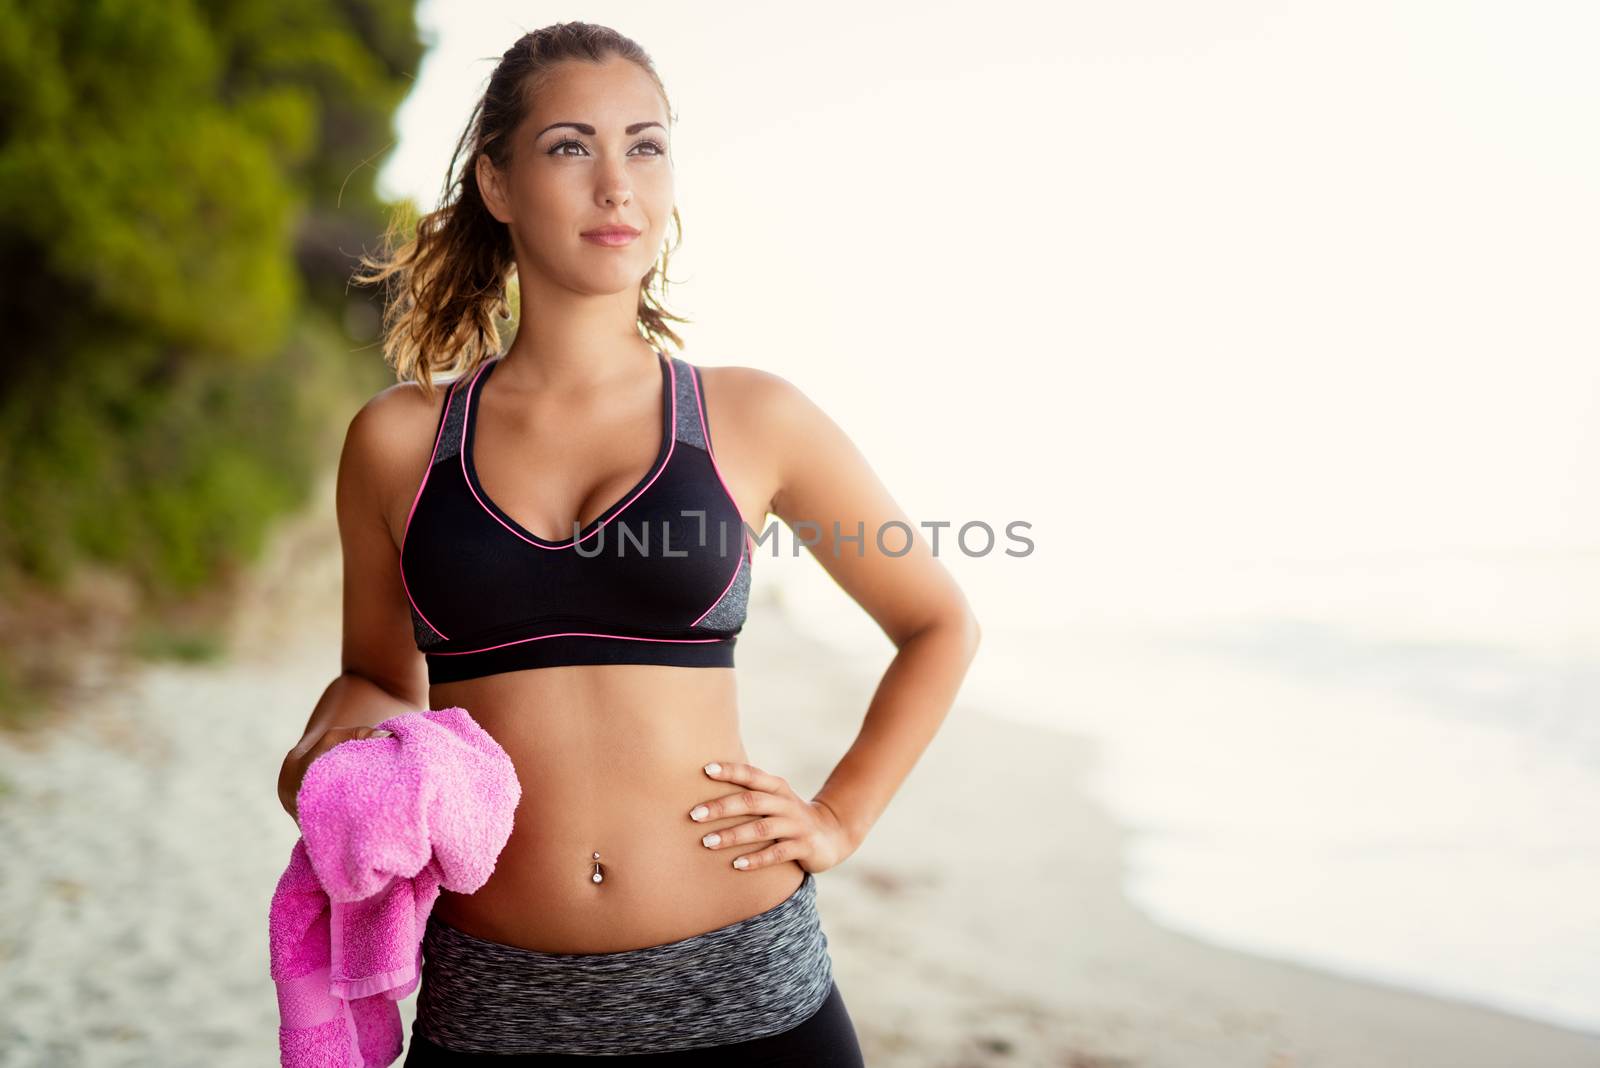 Beautiful young woman relaxing after training on the sands beach. She is holding towel and looking away.